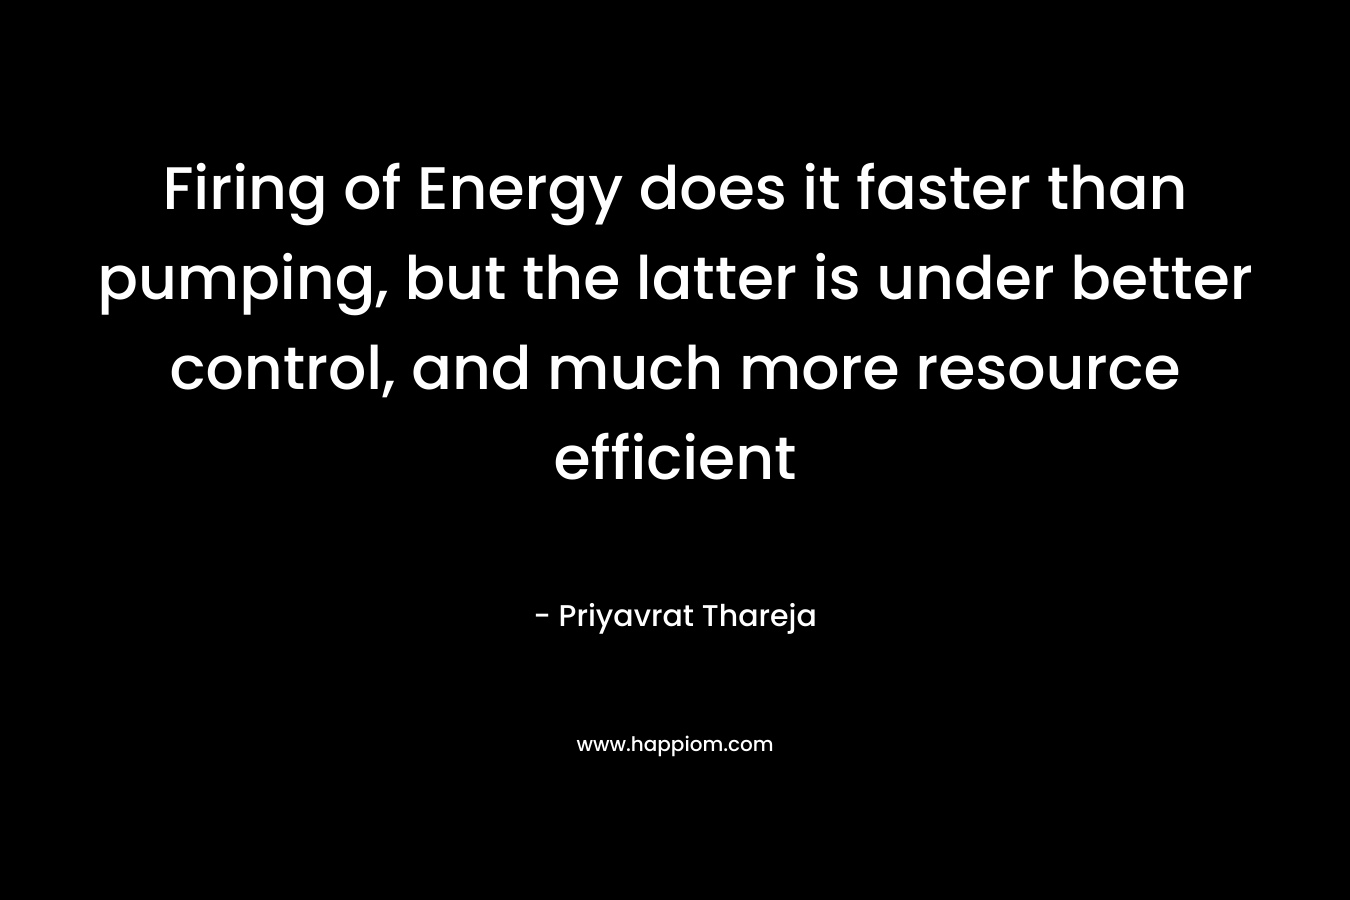 Firing of Energy does it faster than pumping, but the latter is under better control, and much more resource efficient – Priyavrat Thareja